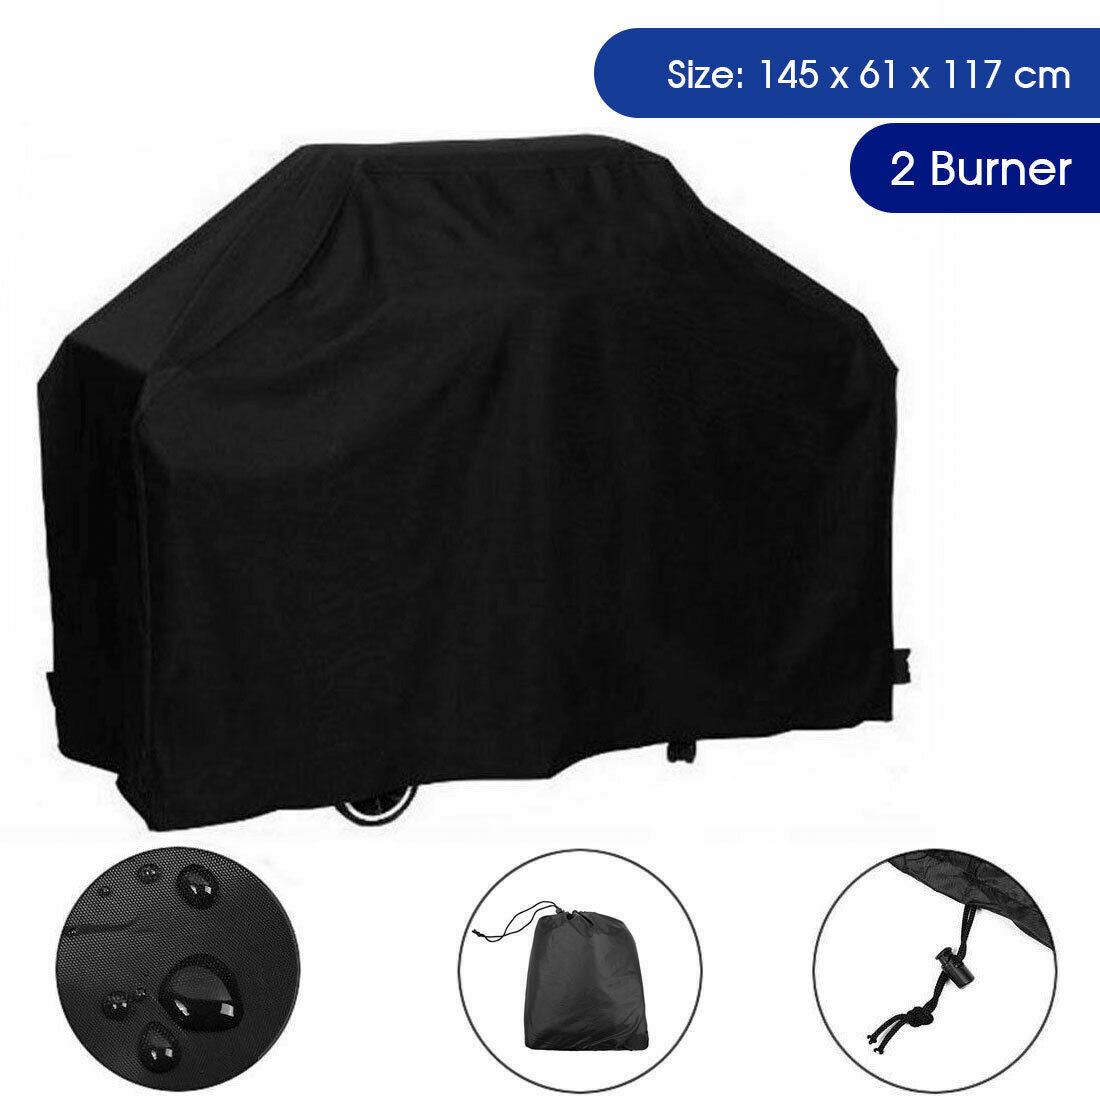 BBQ Cover Burner Waterproof Outdoor Gas Charcoal Barbecue Grill Protector